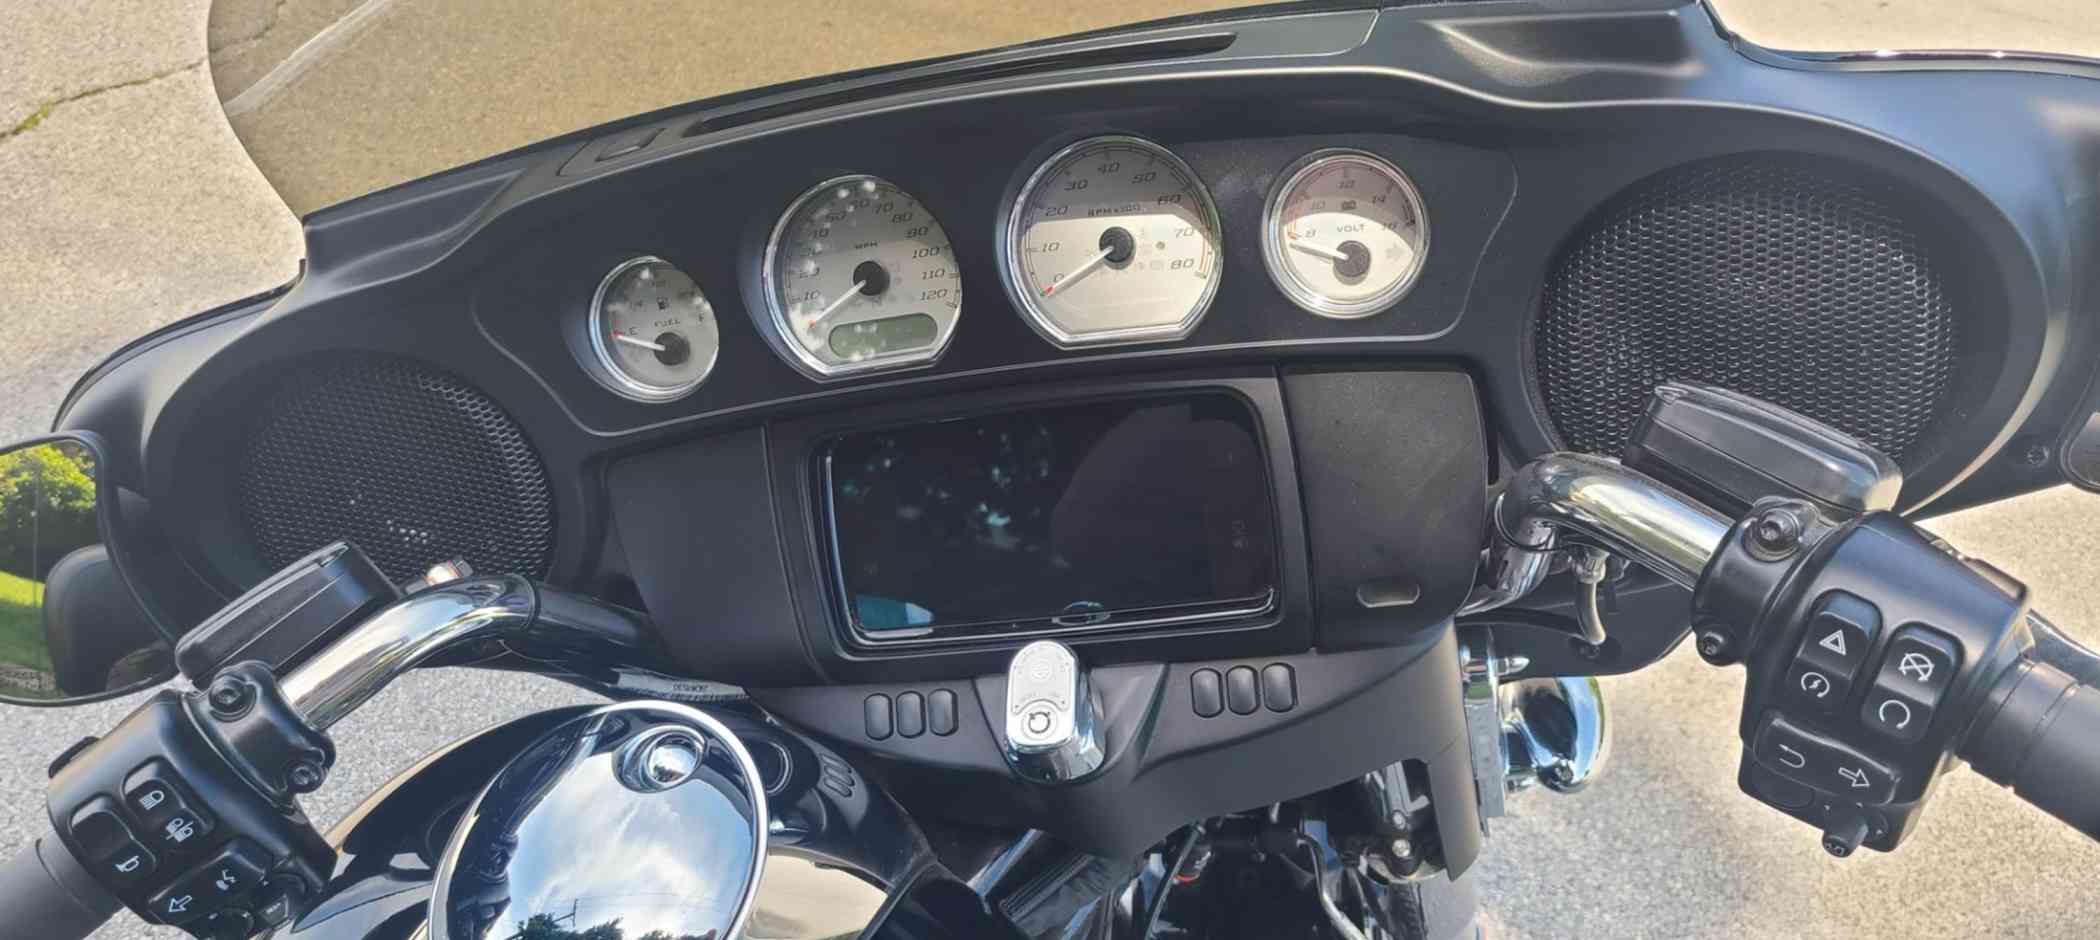 Best Speakers for Road Glide